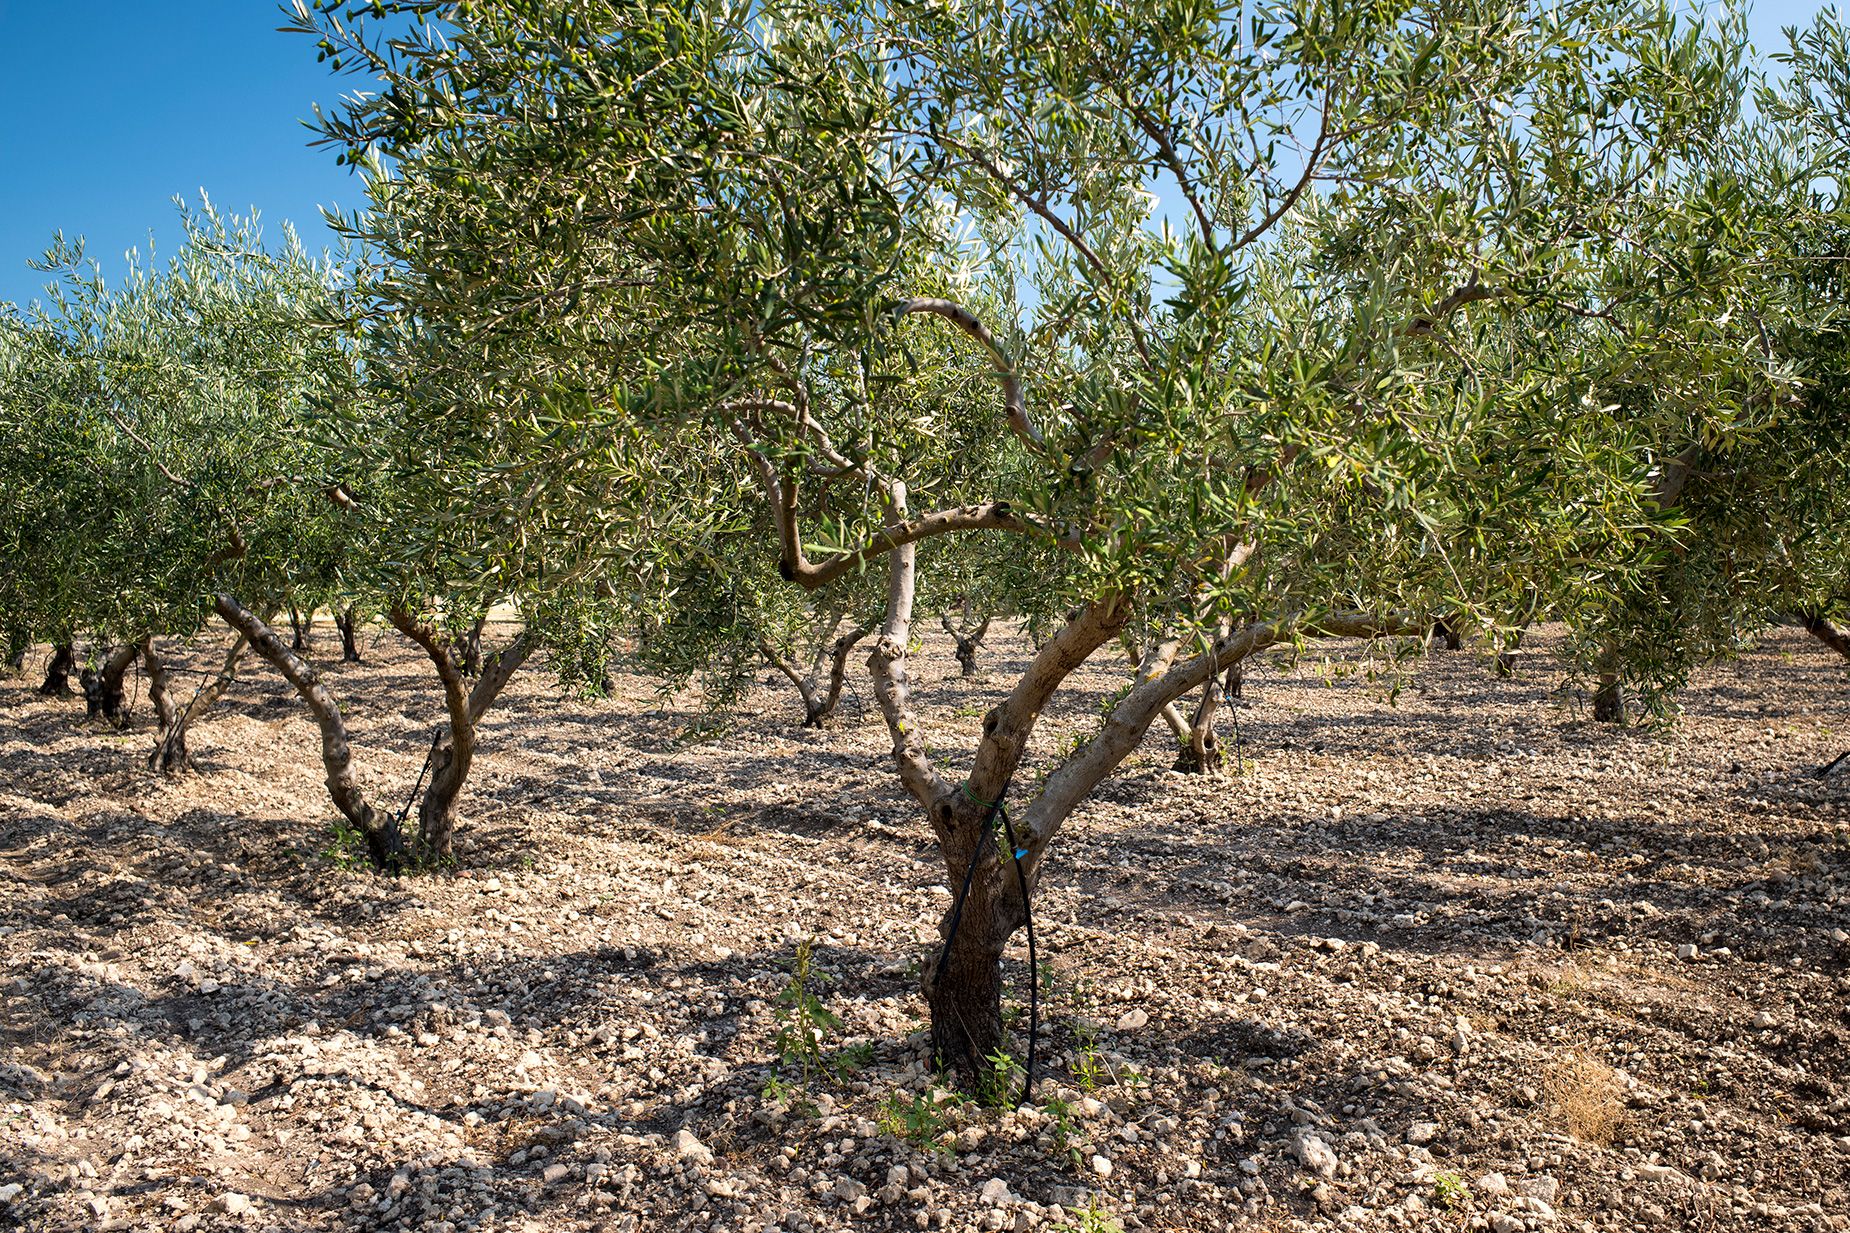 Olive groves have been targeted by thieves who steal trees wholesale or saw off branches laden with fruit.